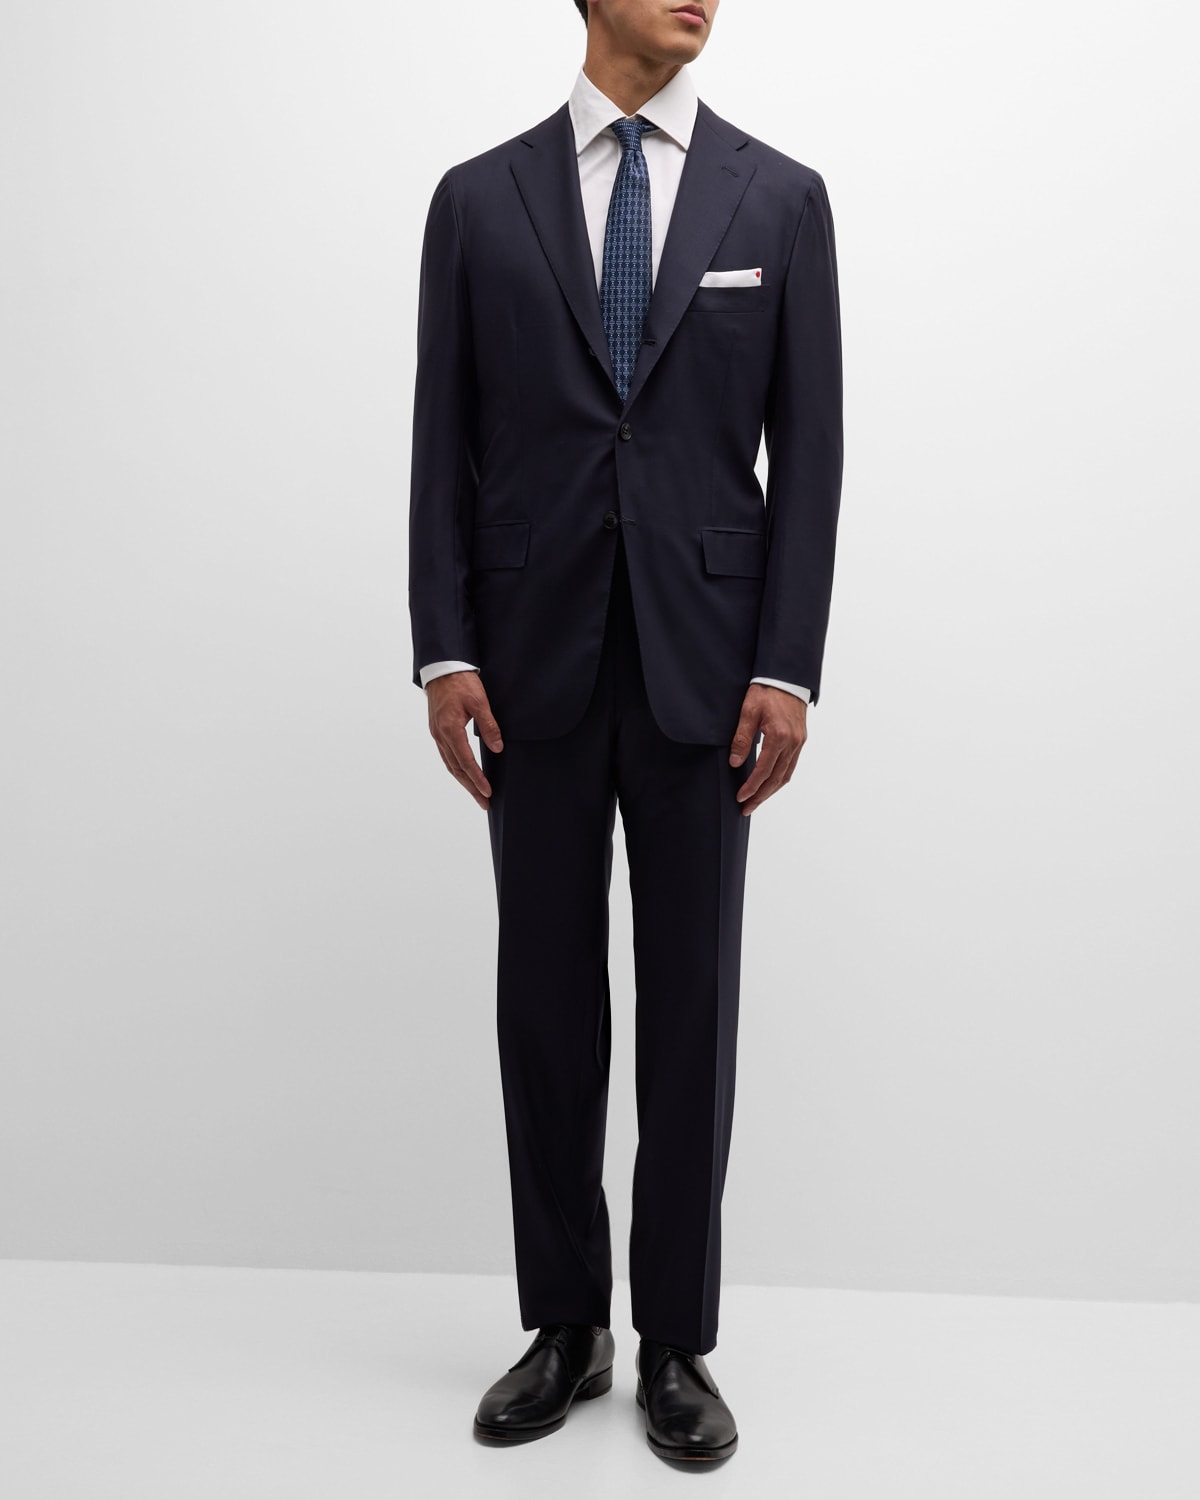 Kiton Men's Two-piece Solid Wool Suit In Navy